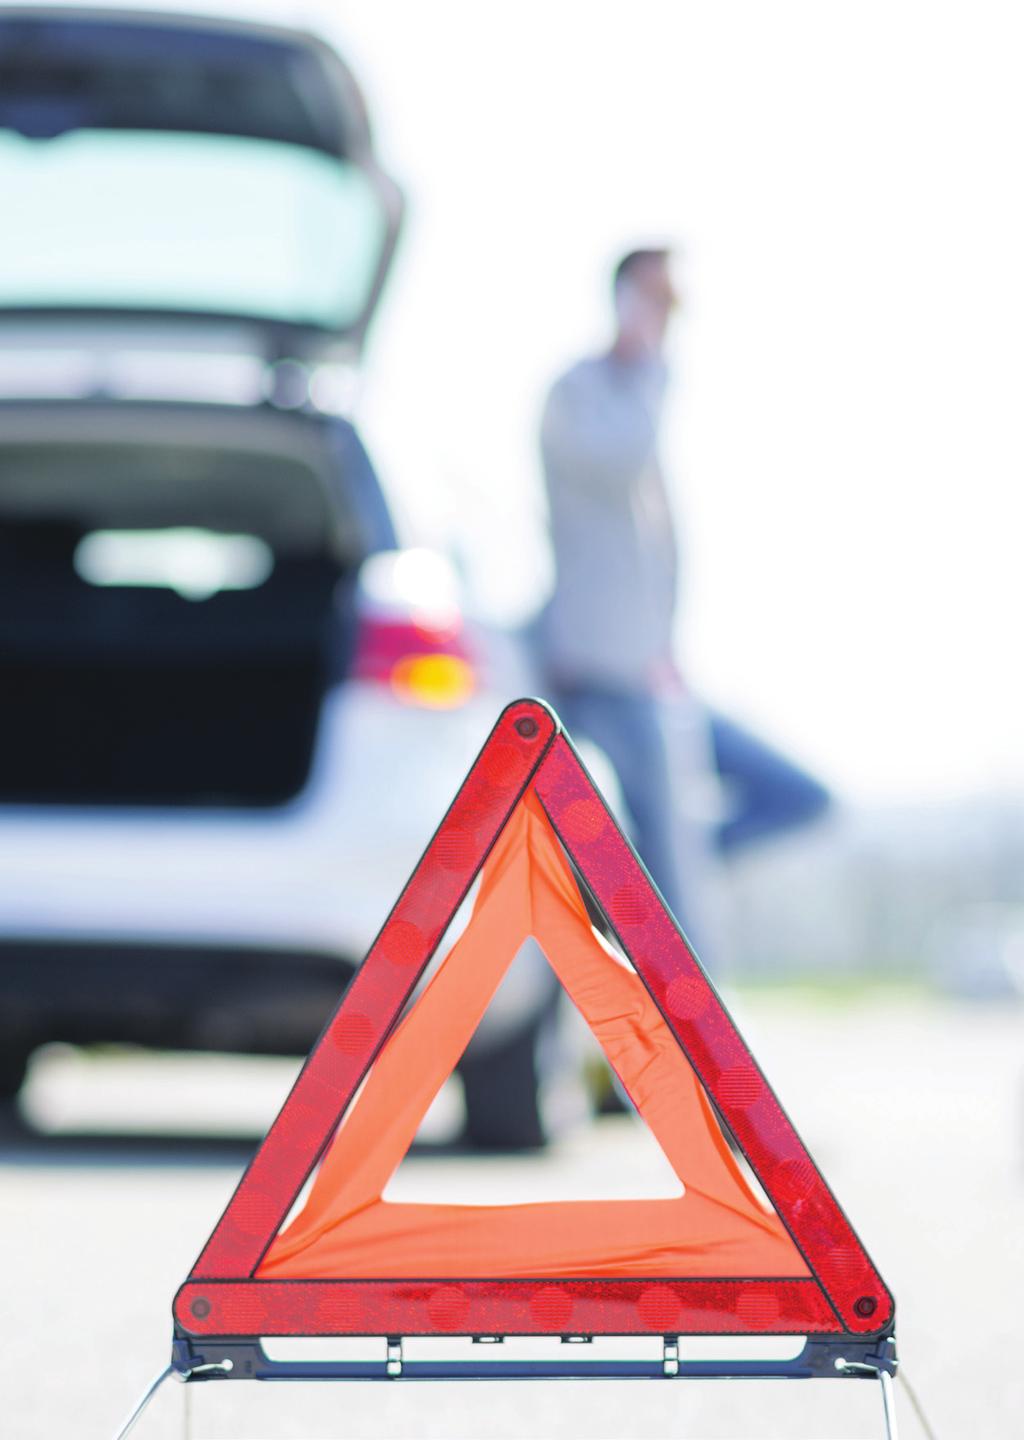 Accident Procedures. Accident / Incident If involved in an accident / incident we have outlined some steps below to guide you through and assist in so far as possible.